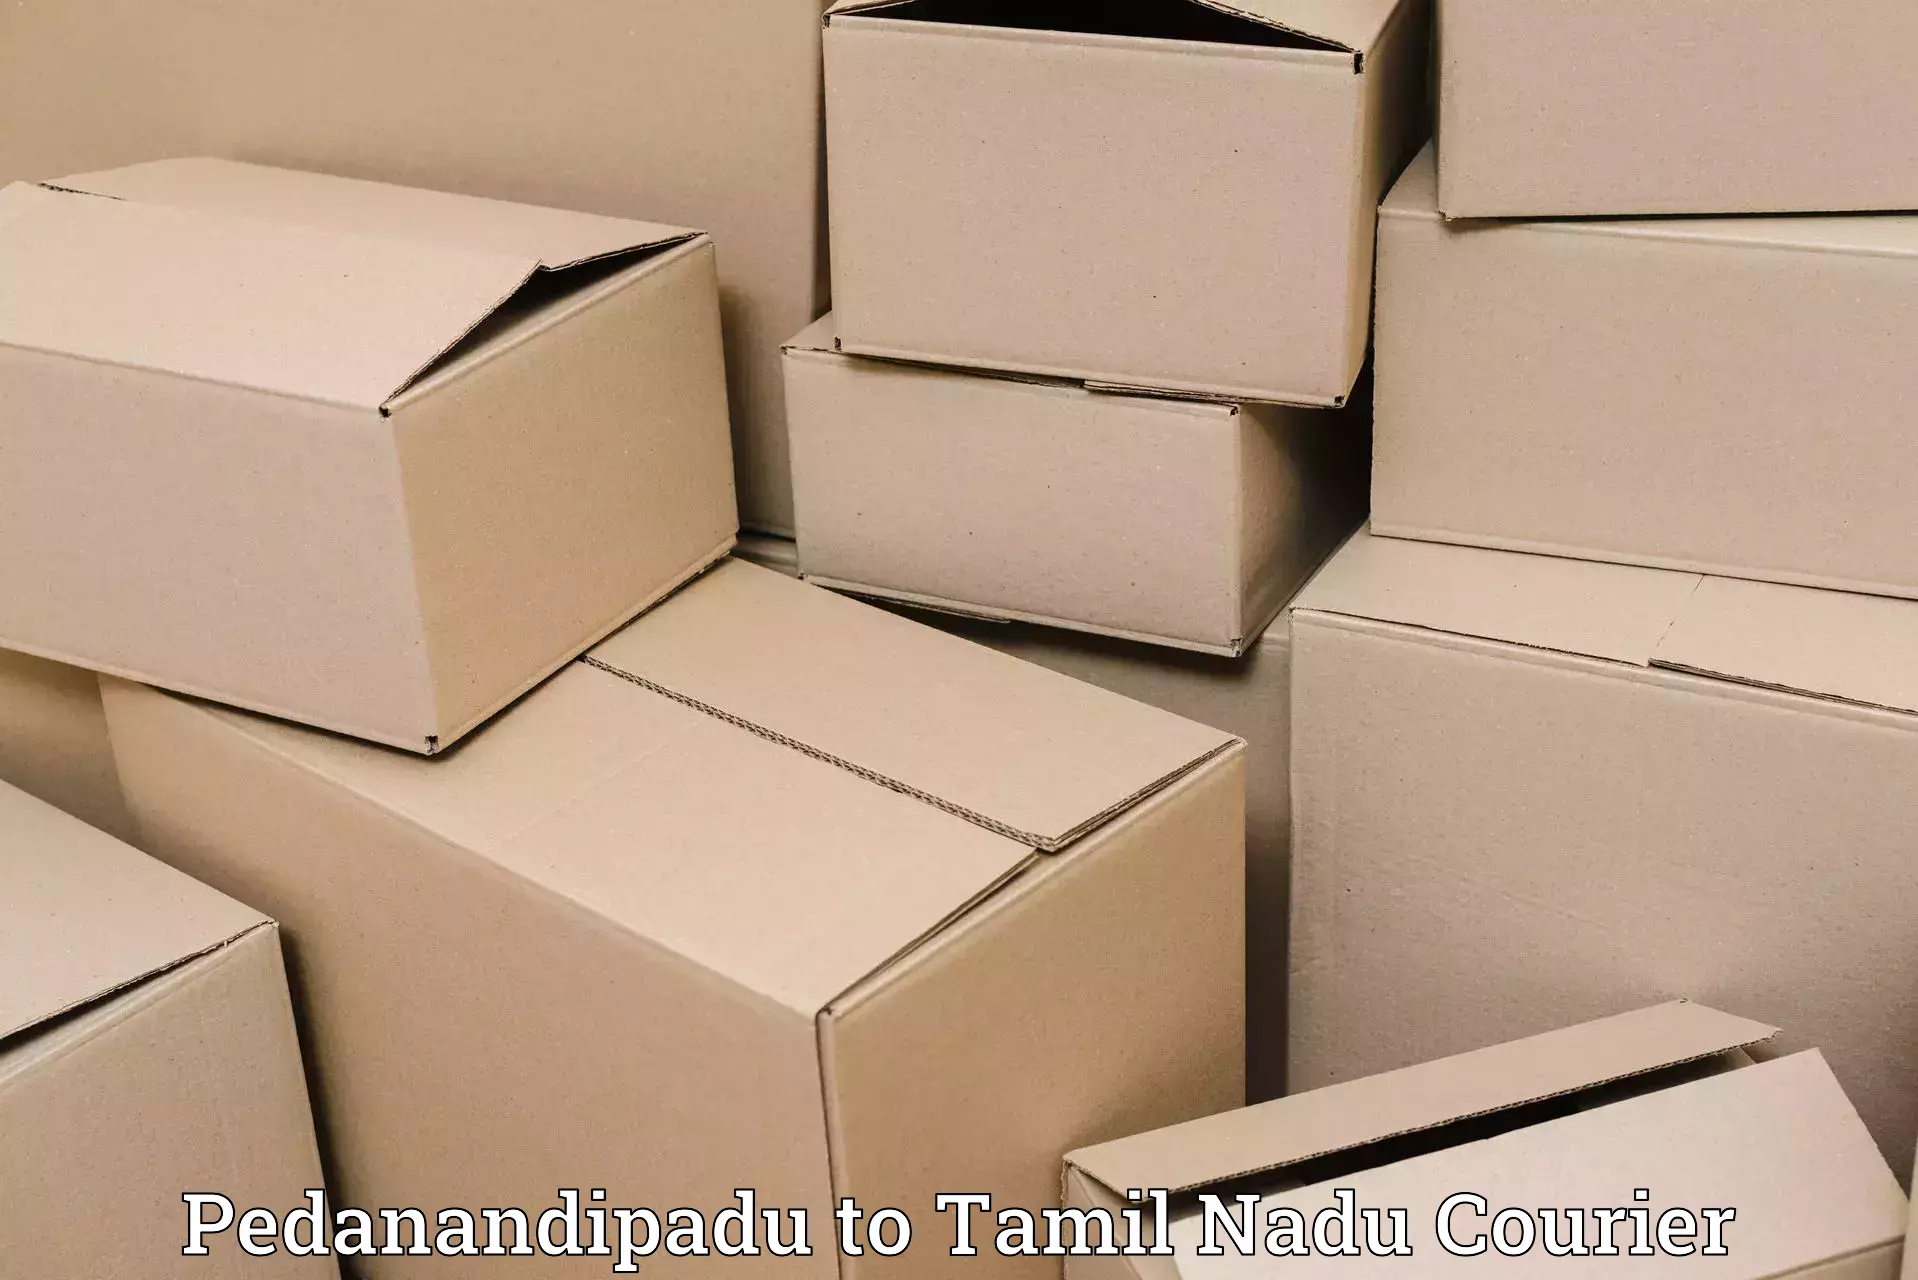 Express delivery capabilities in Pedanandipadu to Chennai Port